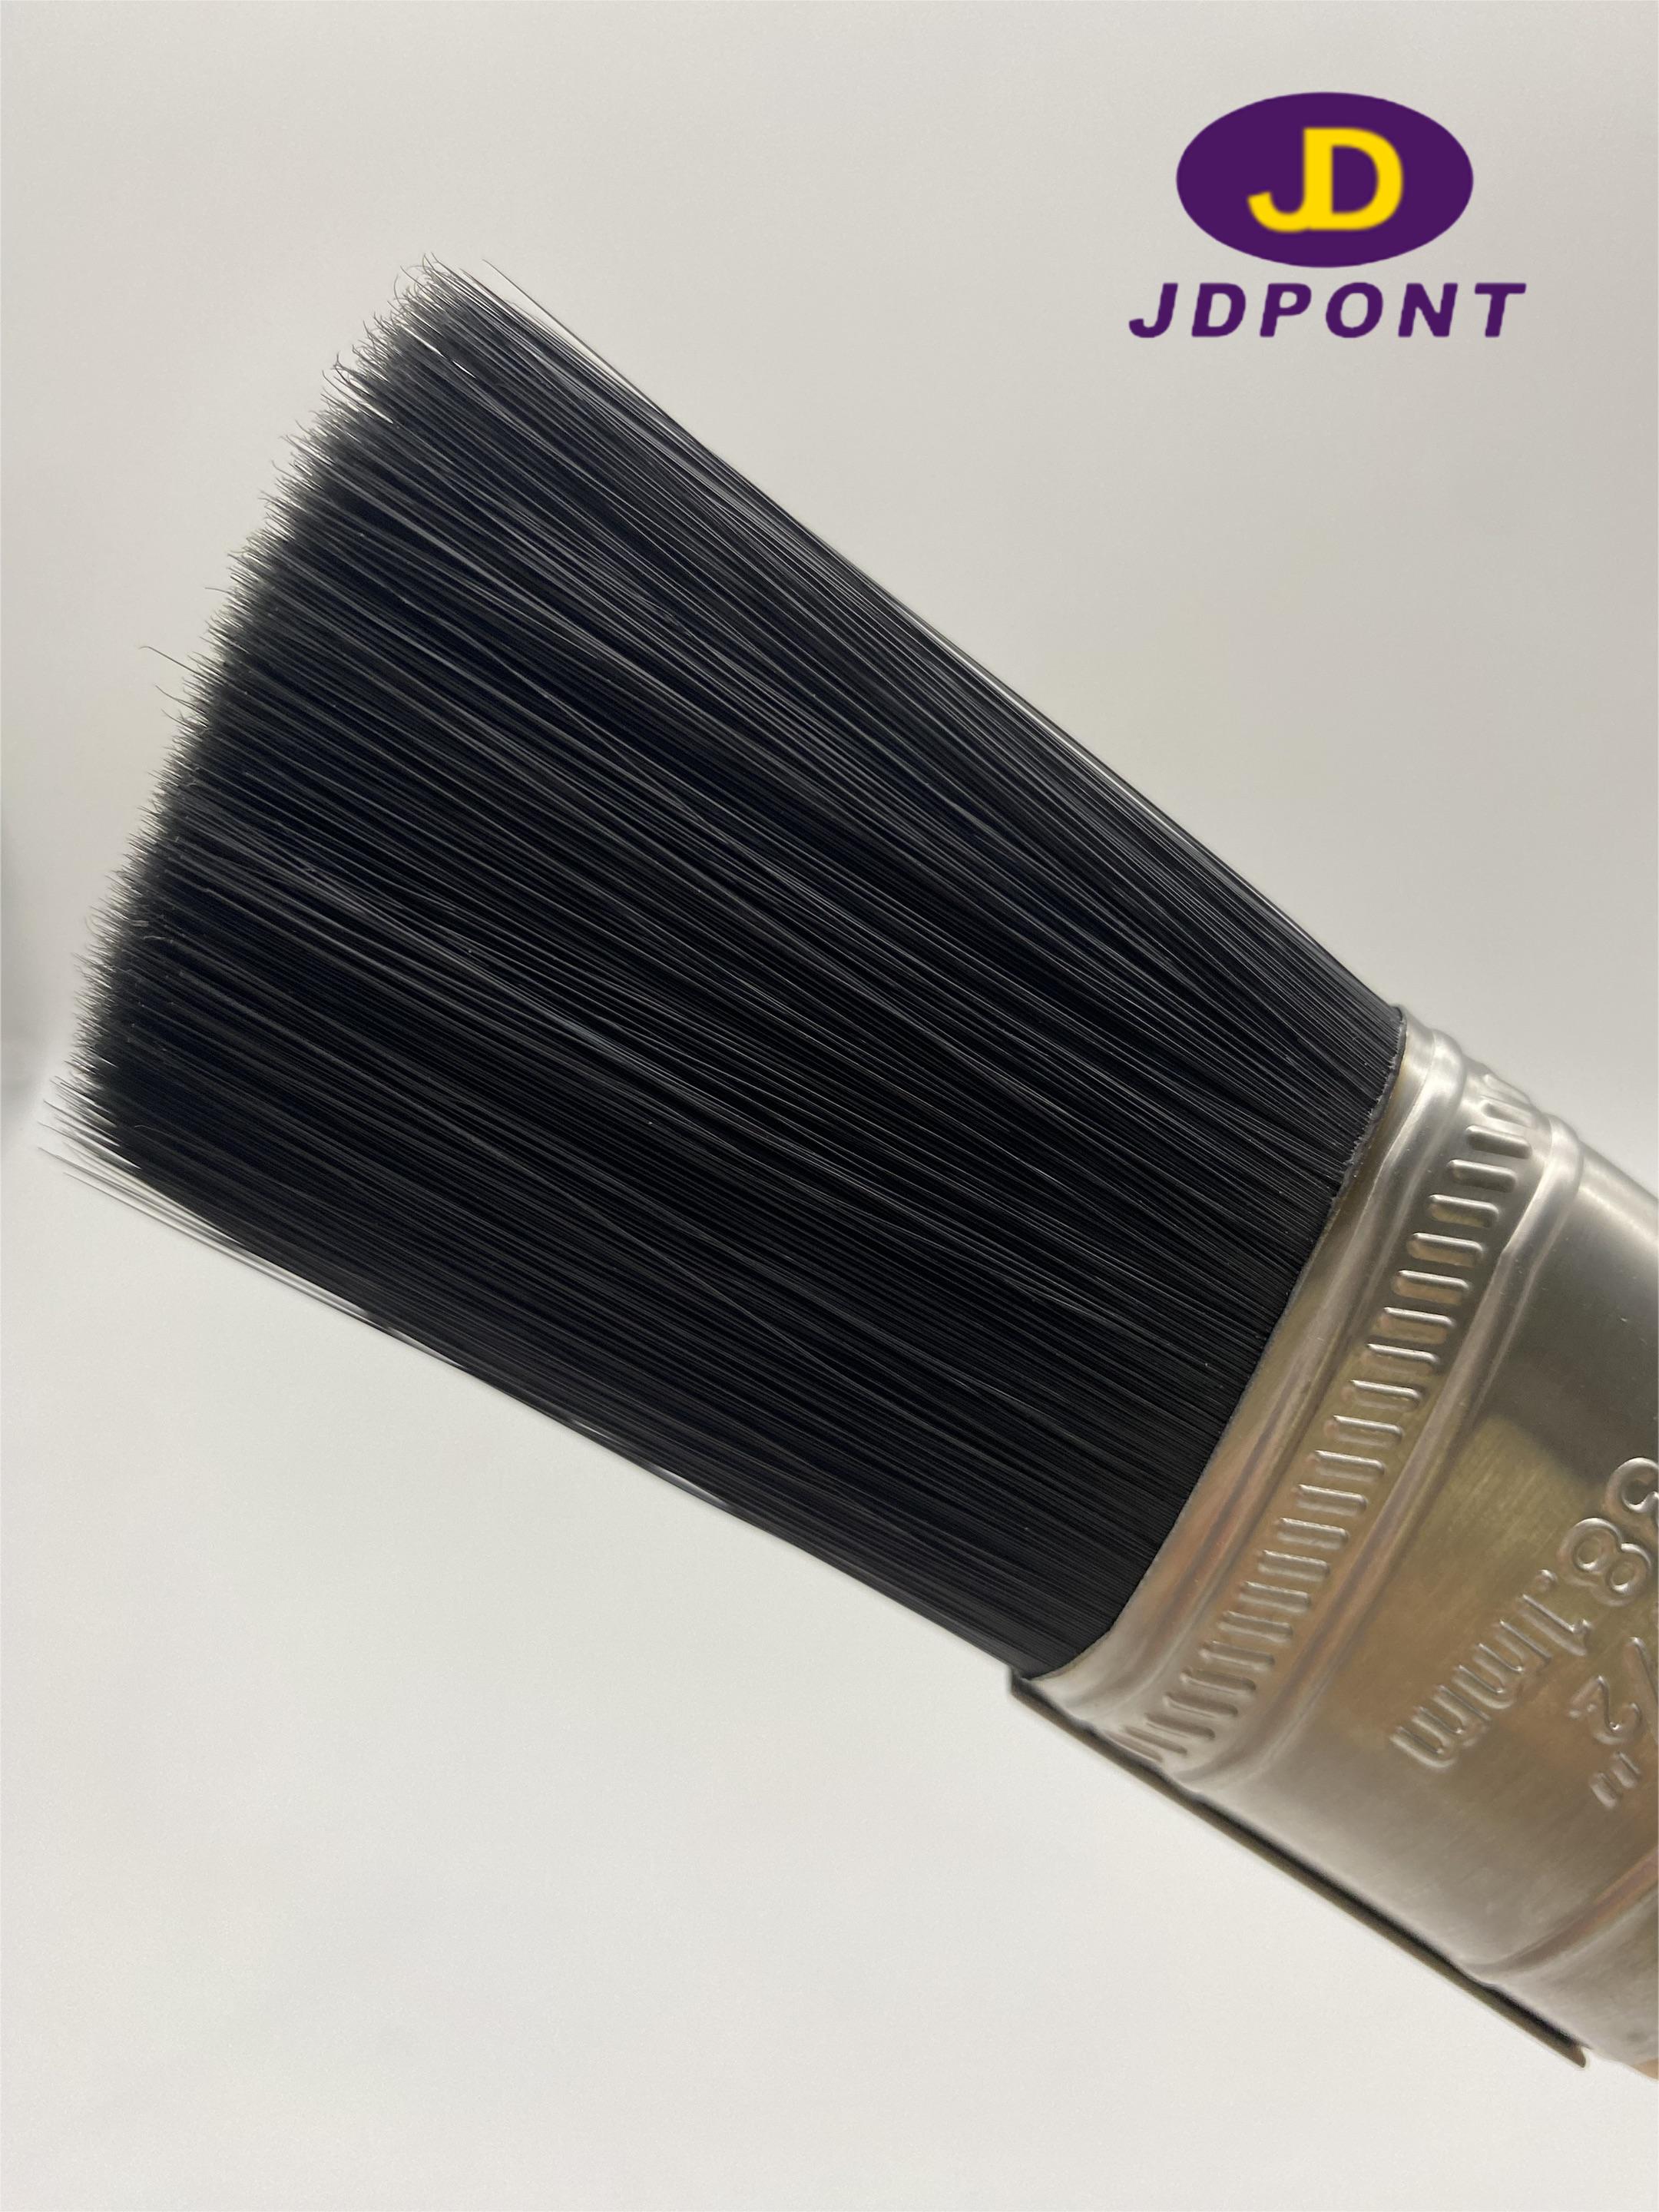 5 PRO-PA JDPBS 1 Wood Handle and 100% Synthetic Filament(Soild Round Tapered) Paint Brush(图2)